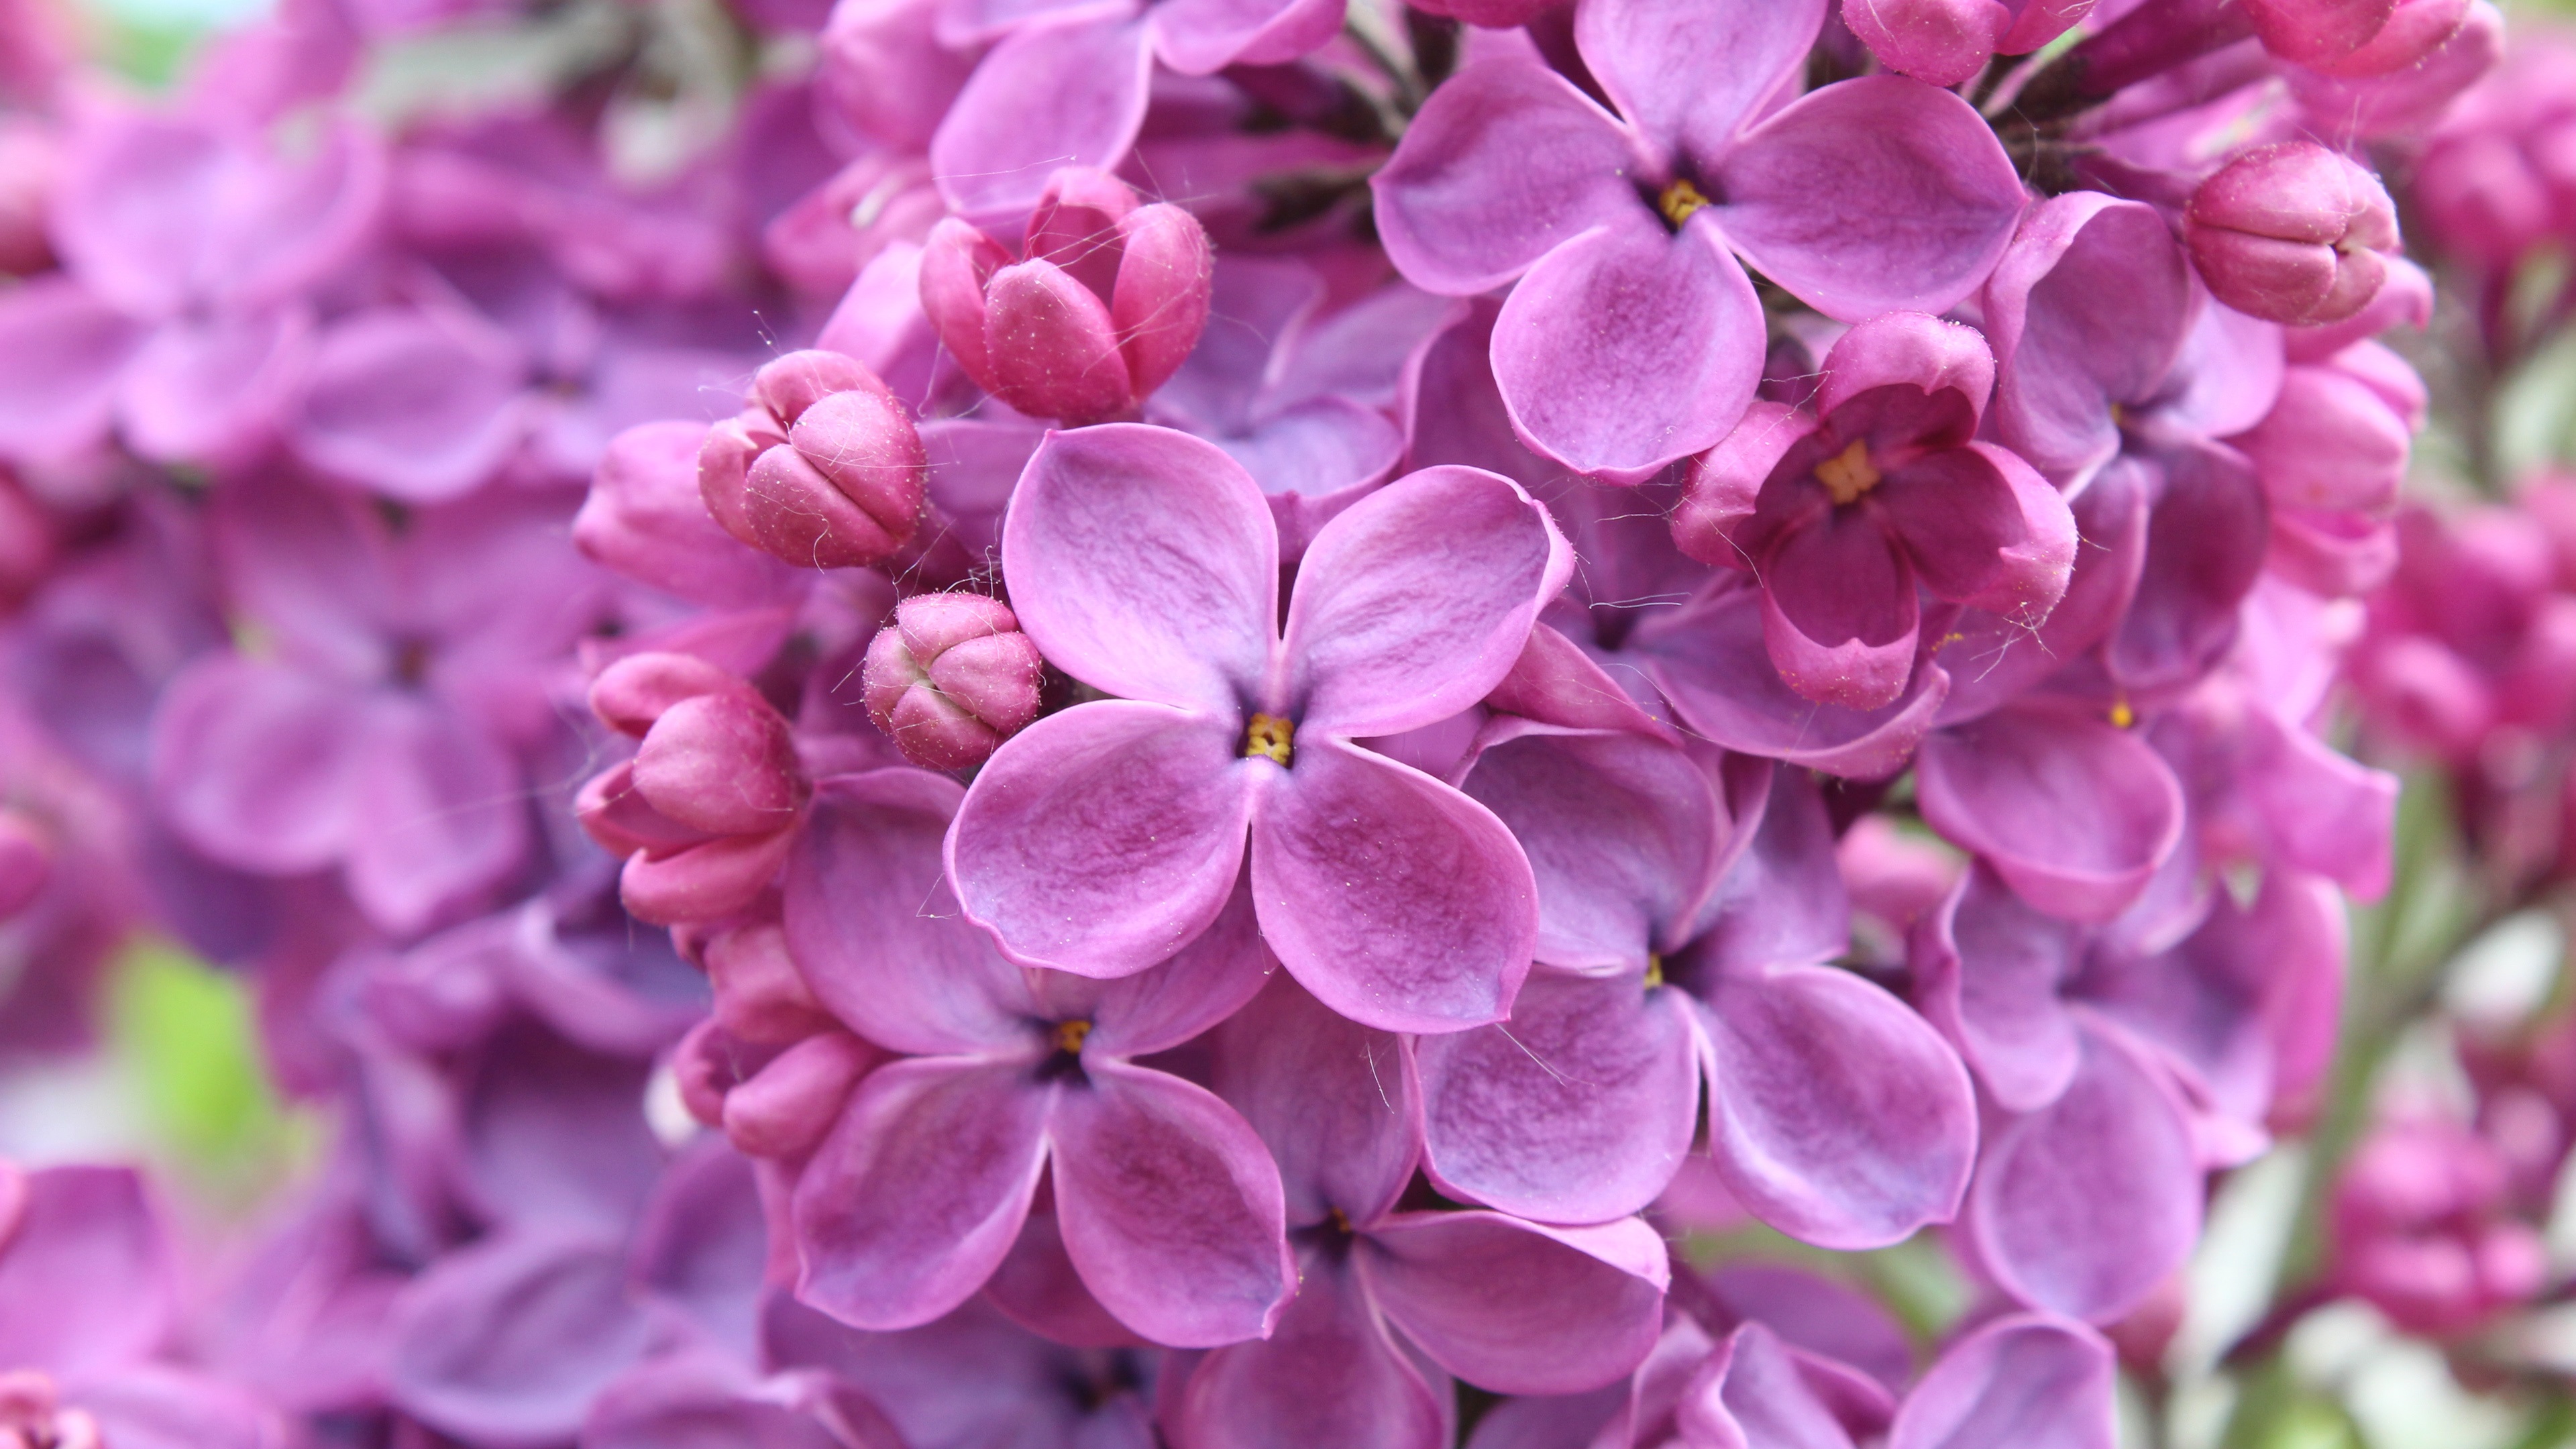 Flowers close-up, purple color lilac macro photography wallpaper ...